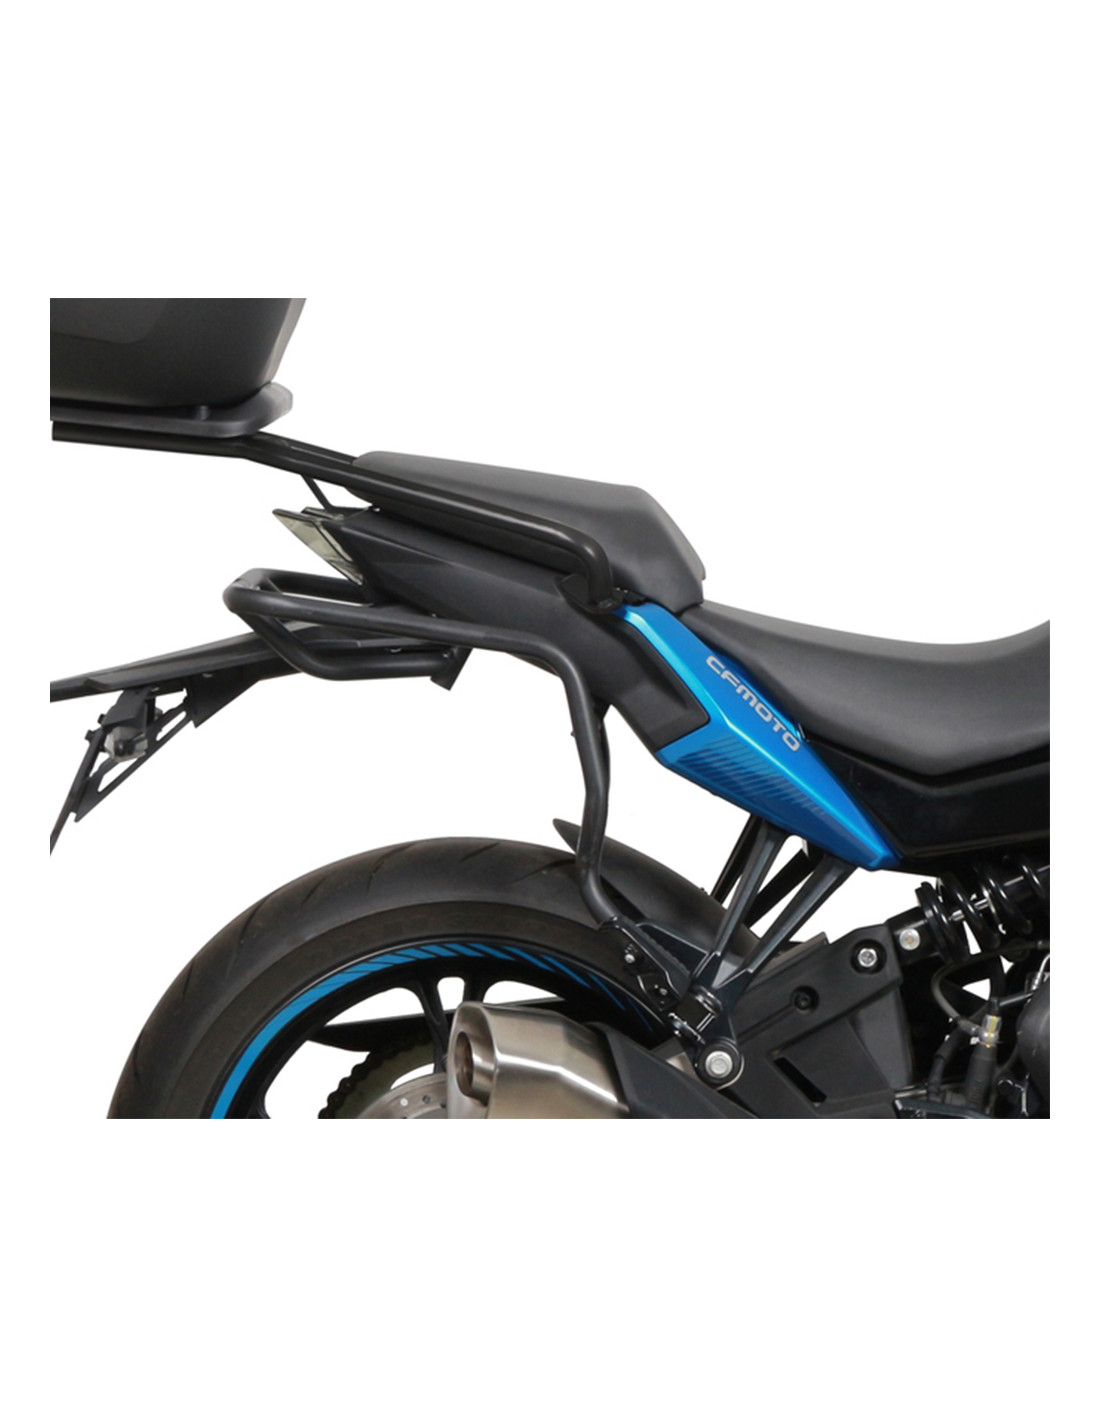 Support valises latérales Shad 4P System Cf Moto 800MT - Supports - Valises  latérales - Bagagerie